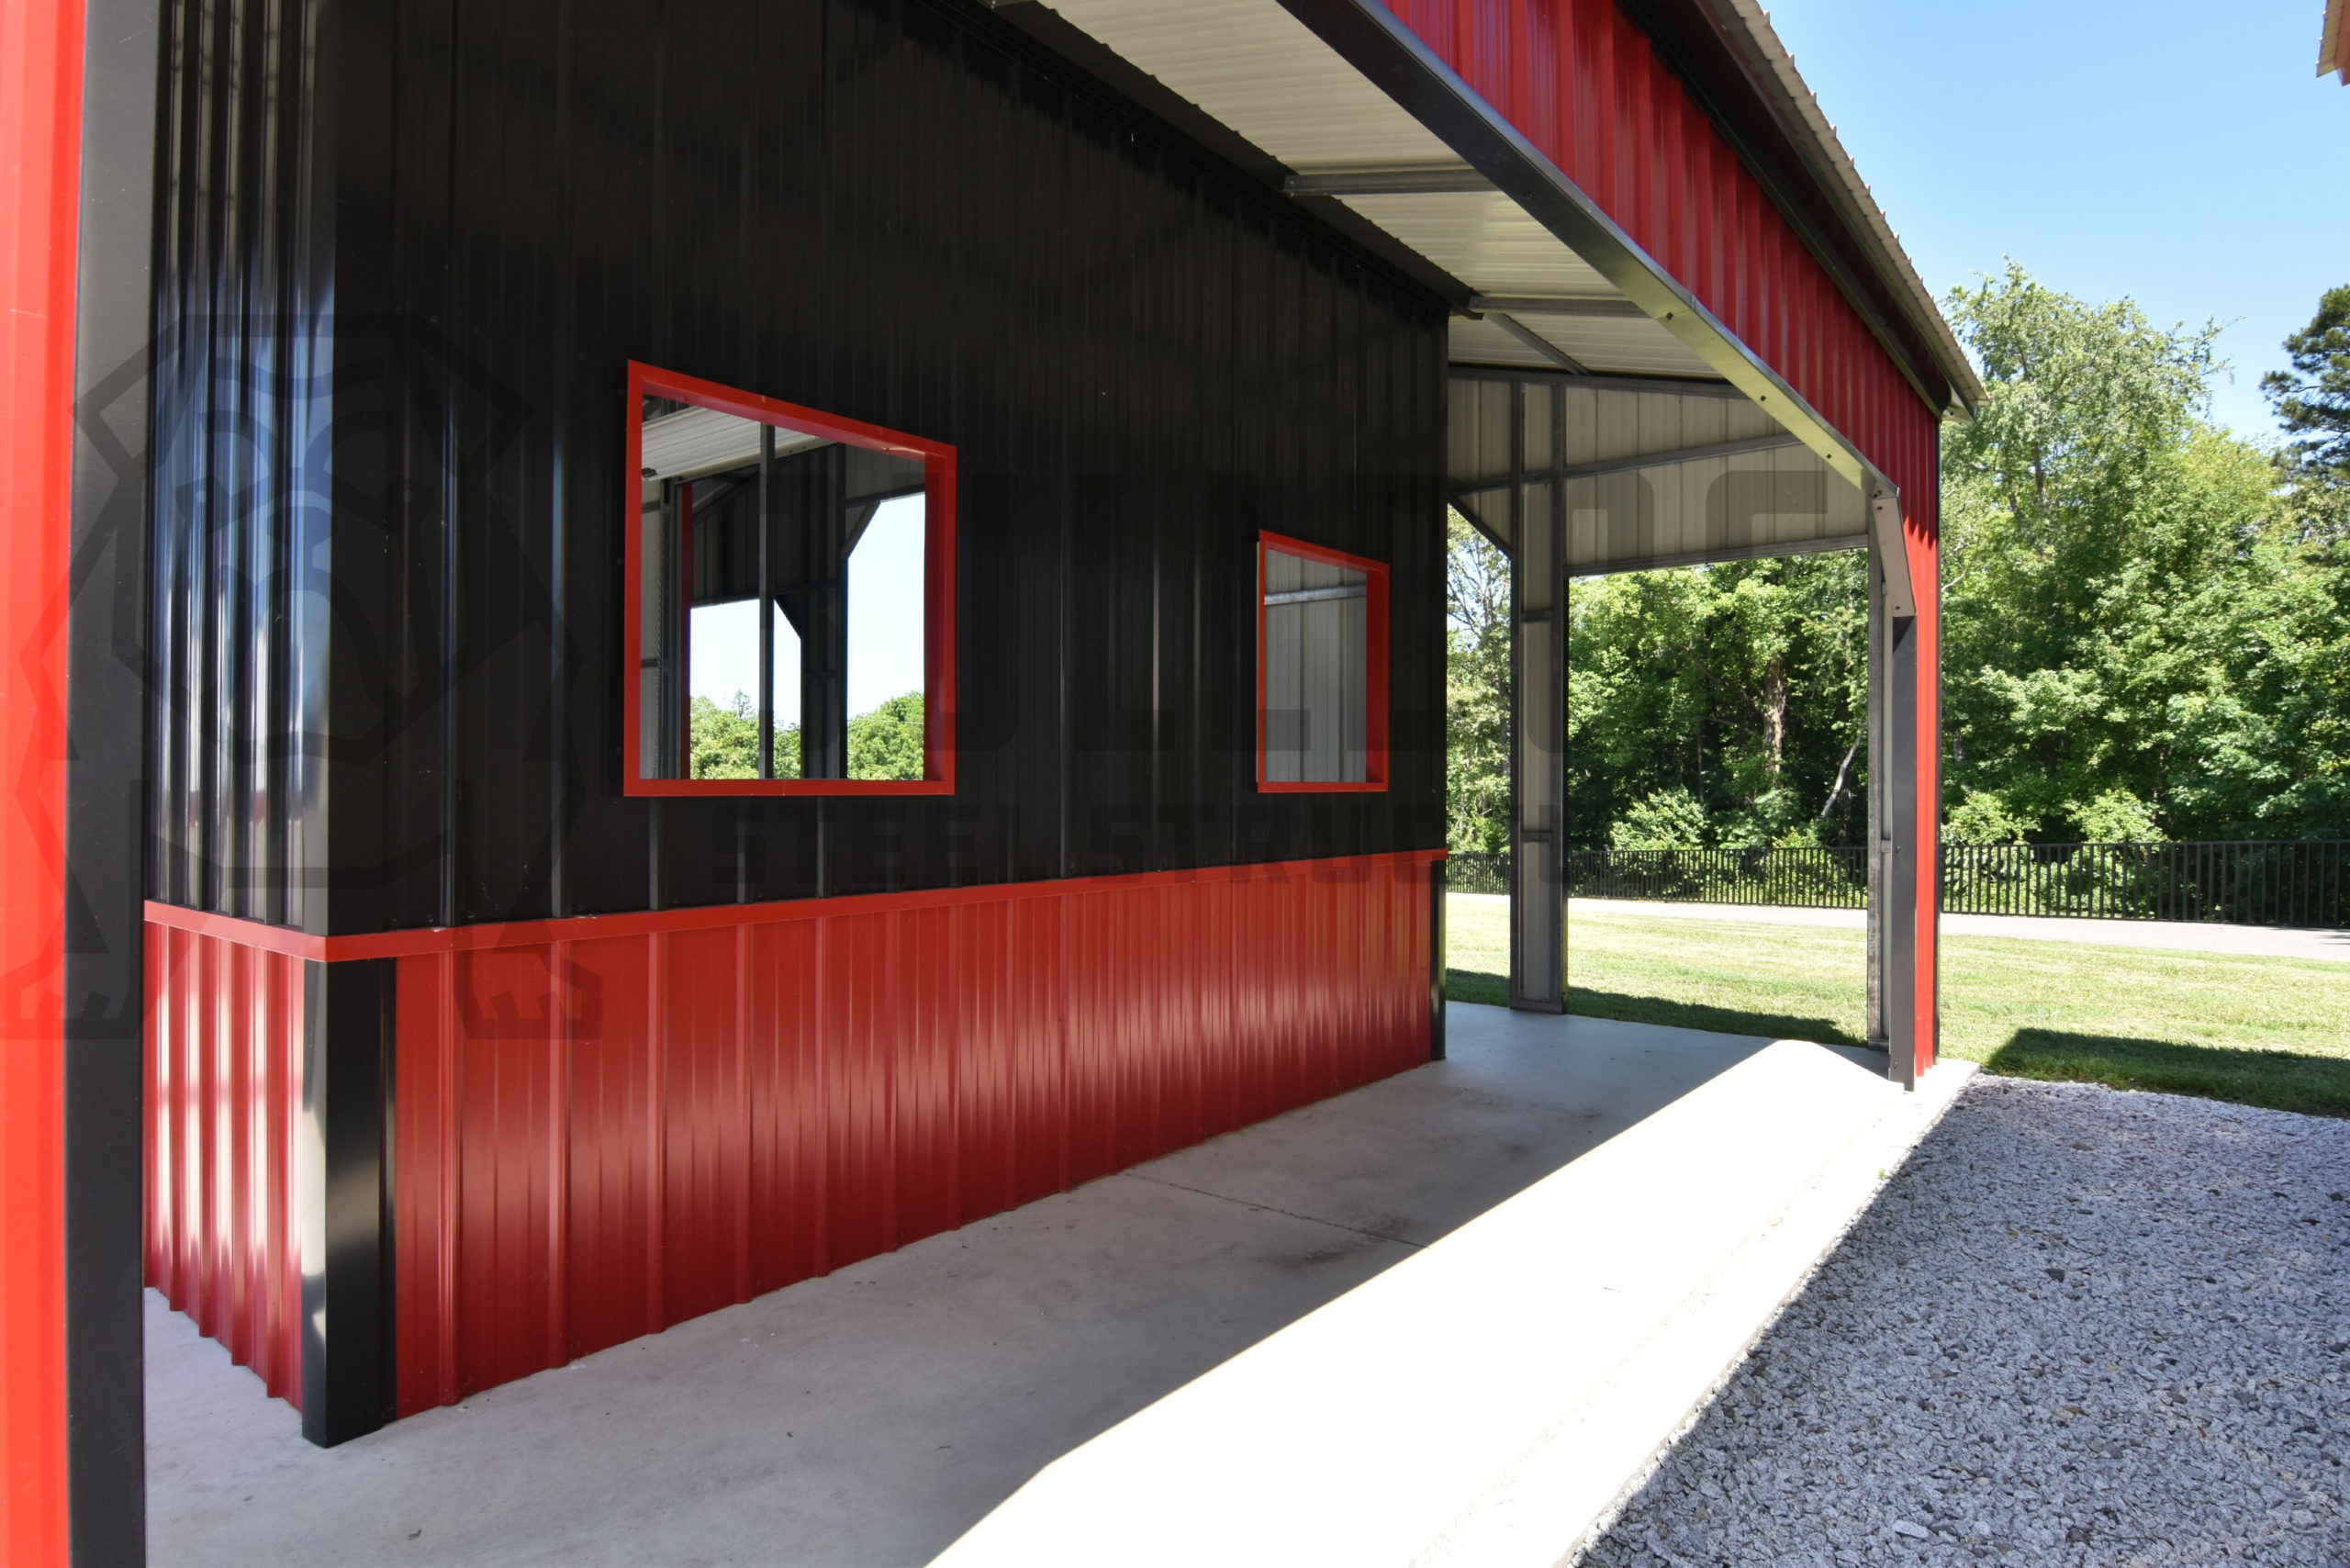 Close up of exterior of custom red barn with black trim